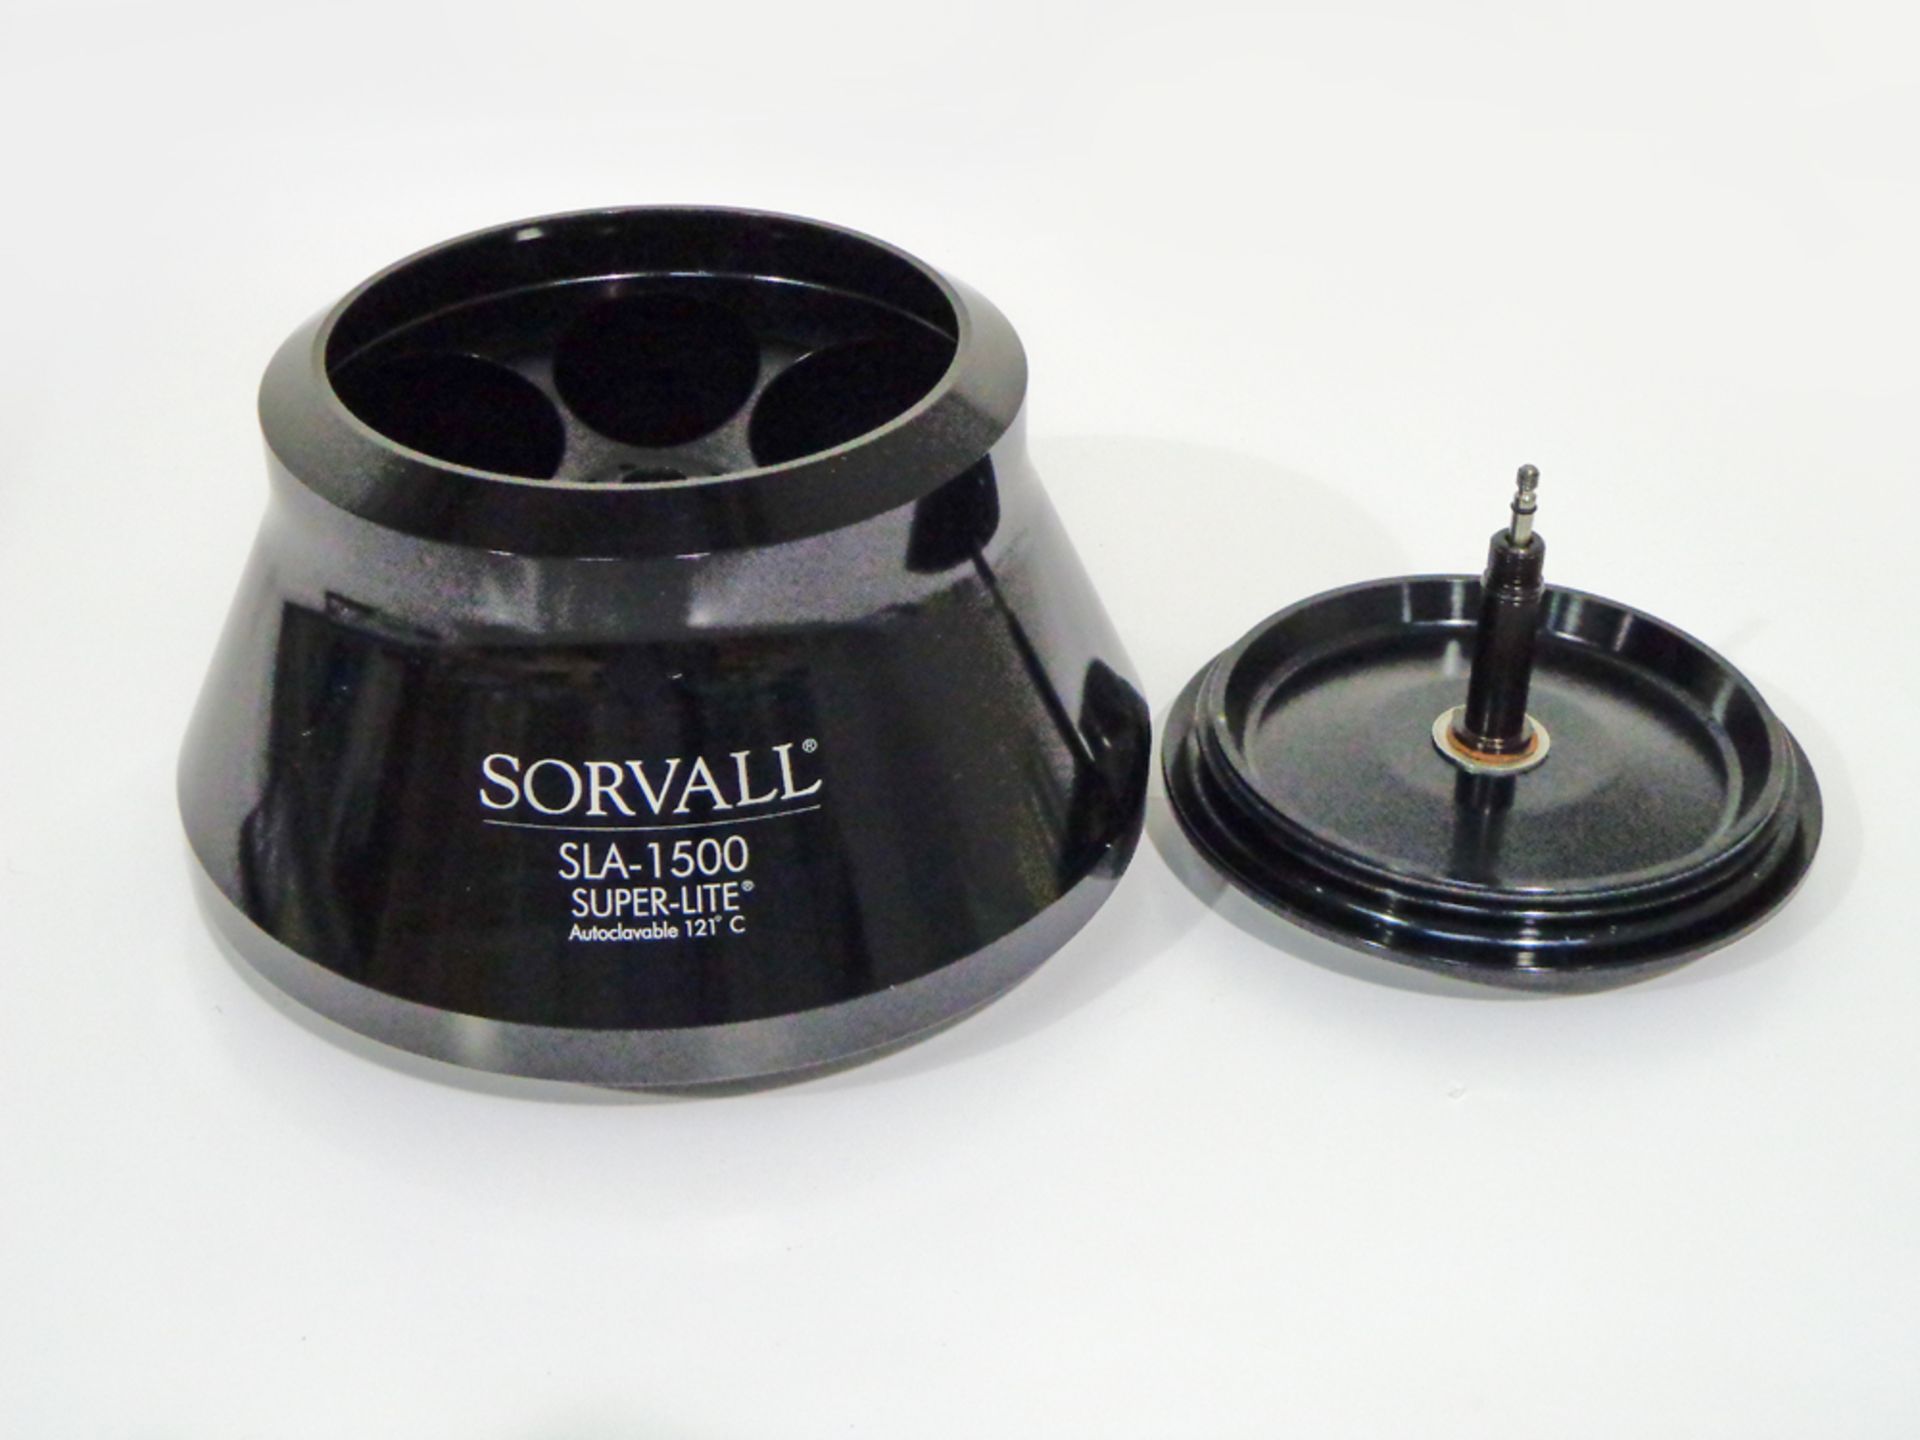 ThermoFisher Scientific: Sorvall Super-Lite Model SLA-1500, Six Place 250ml Bucket Space Fixed Angle - Image 4 of 5